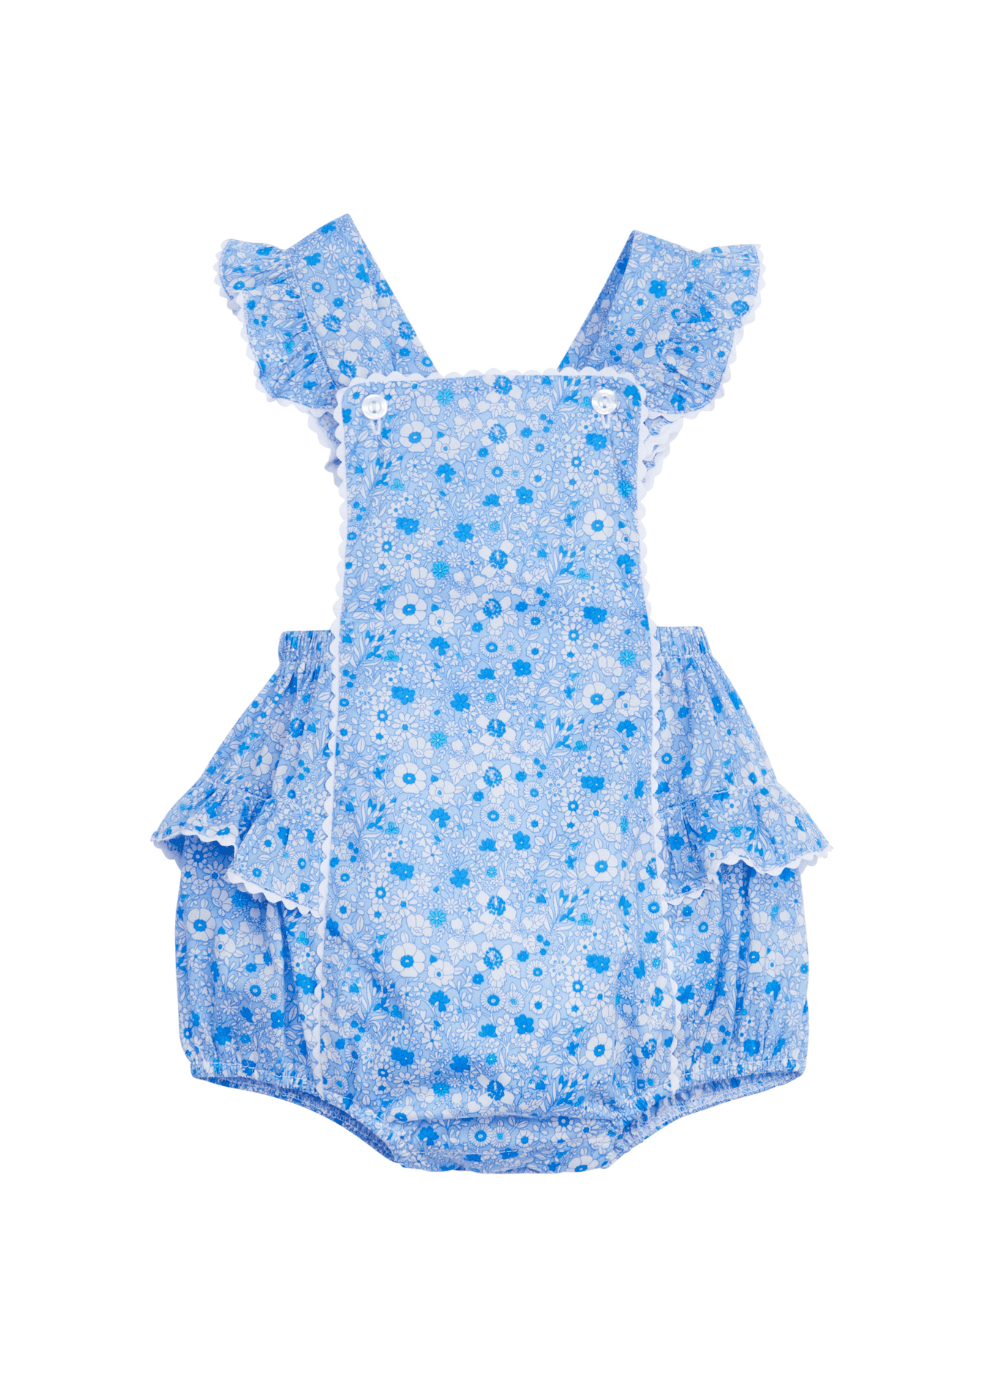 classic childrens clothing girls blue and white floral sunsuit with ruffled straps and white ric rac trim